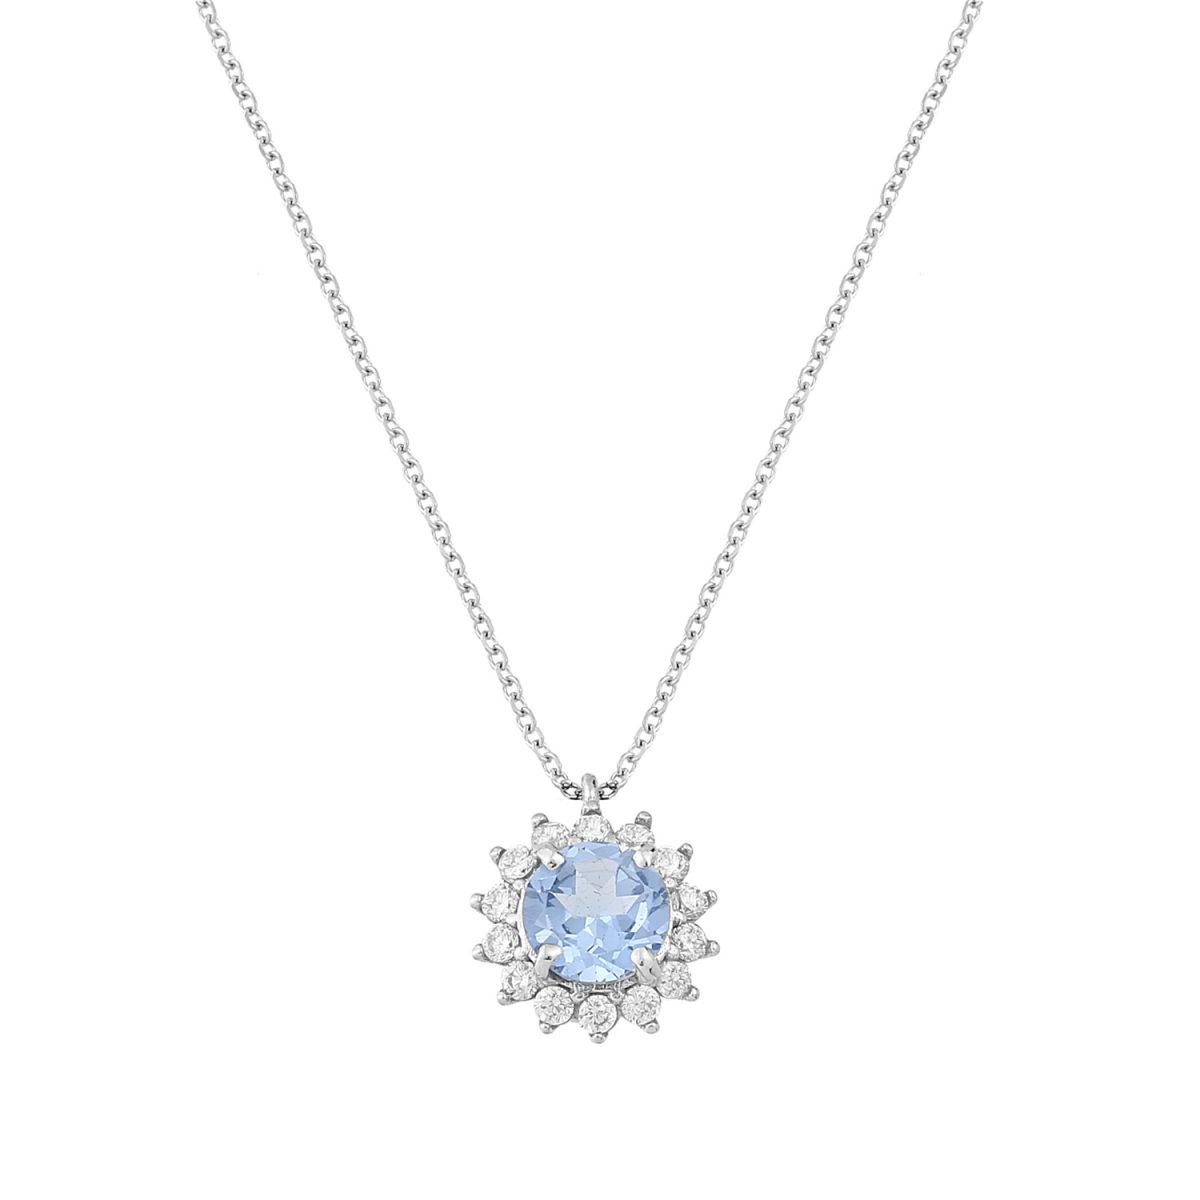 Rosette necklace with Blue stone